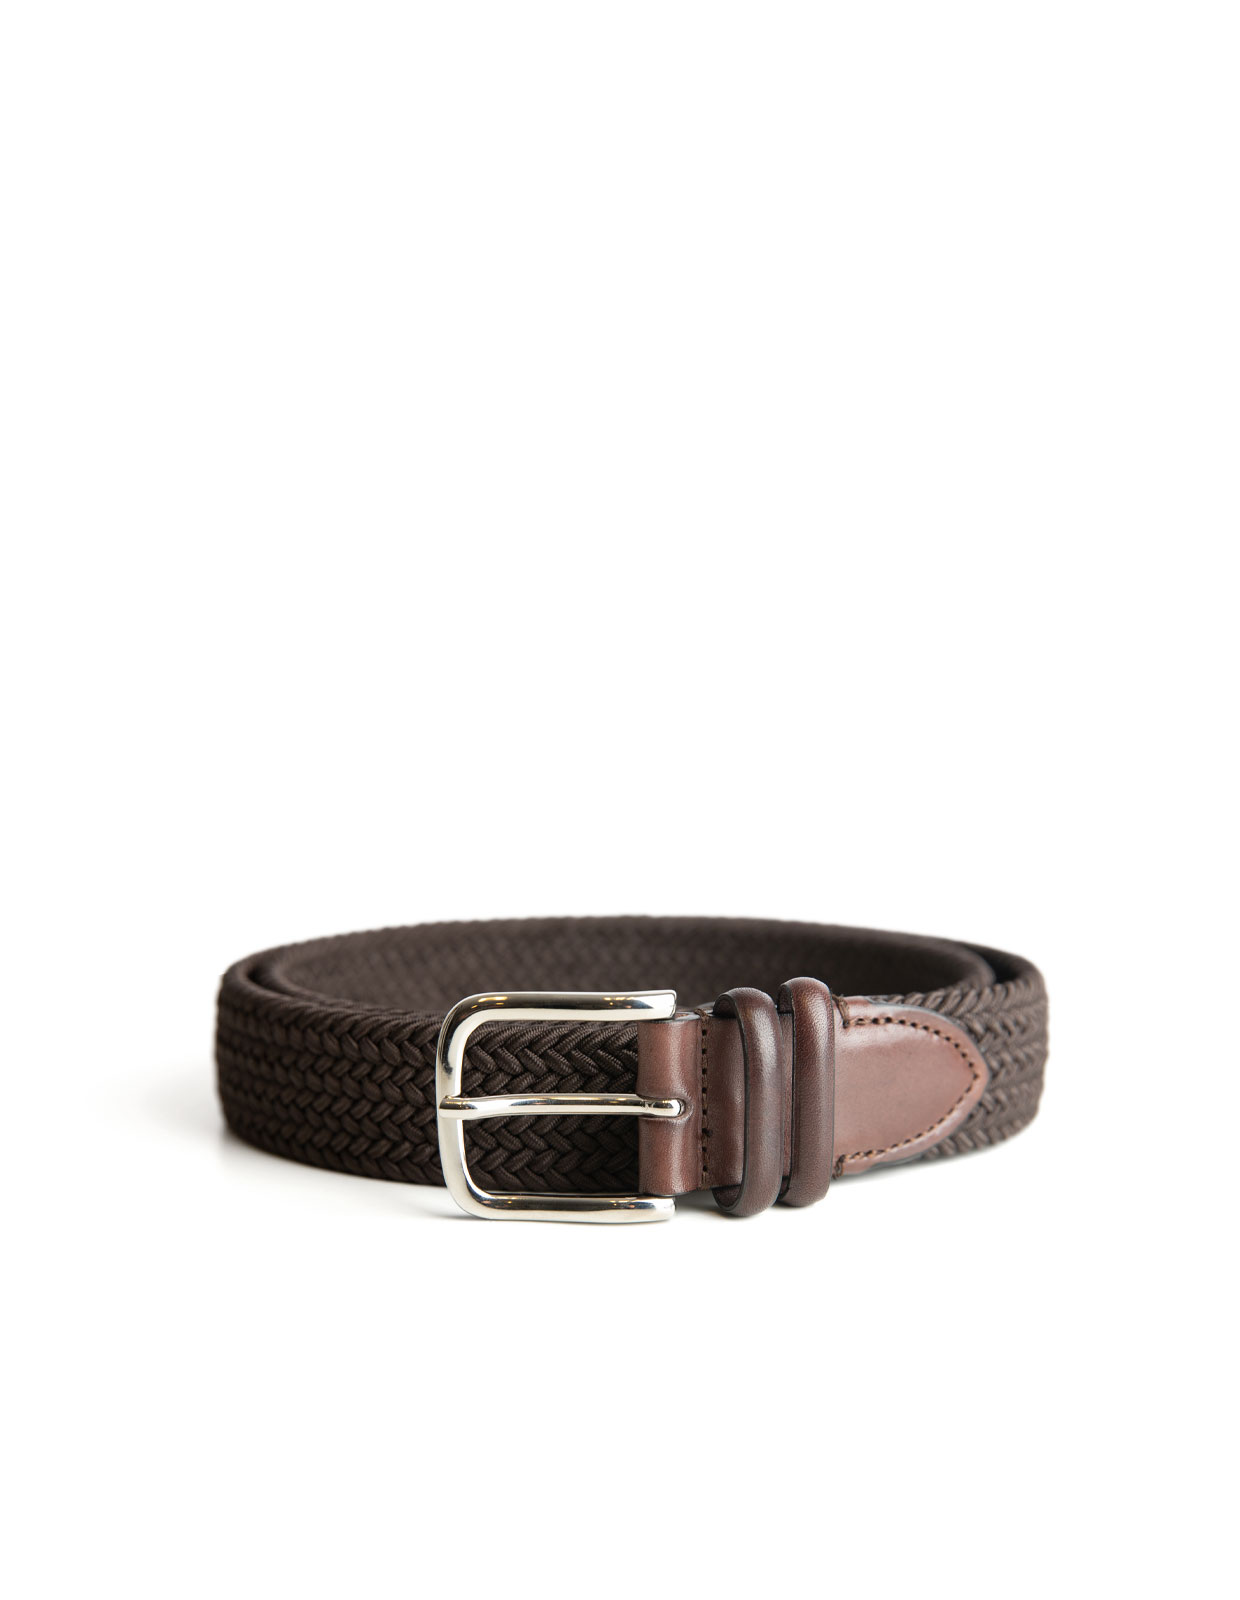 Woven Stretched Rayon Belt Dark Brown Stl 105